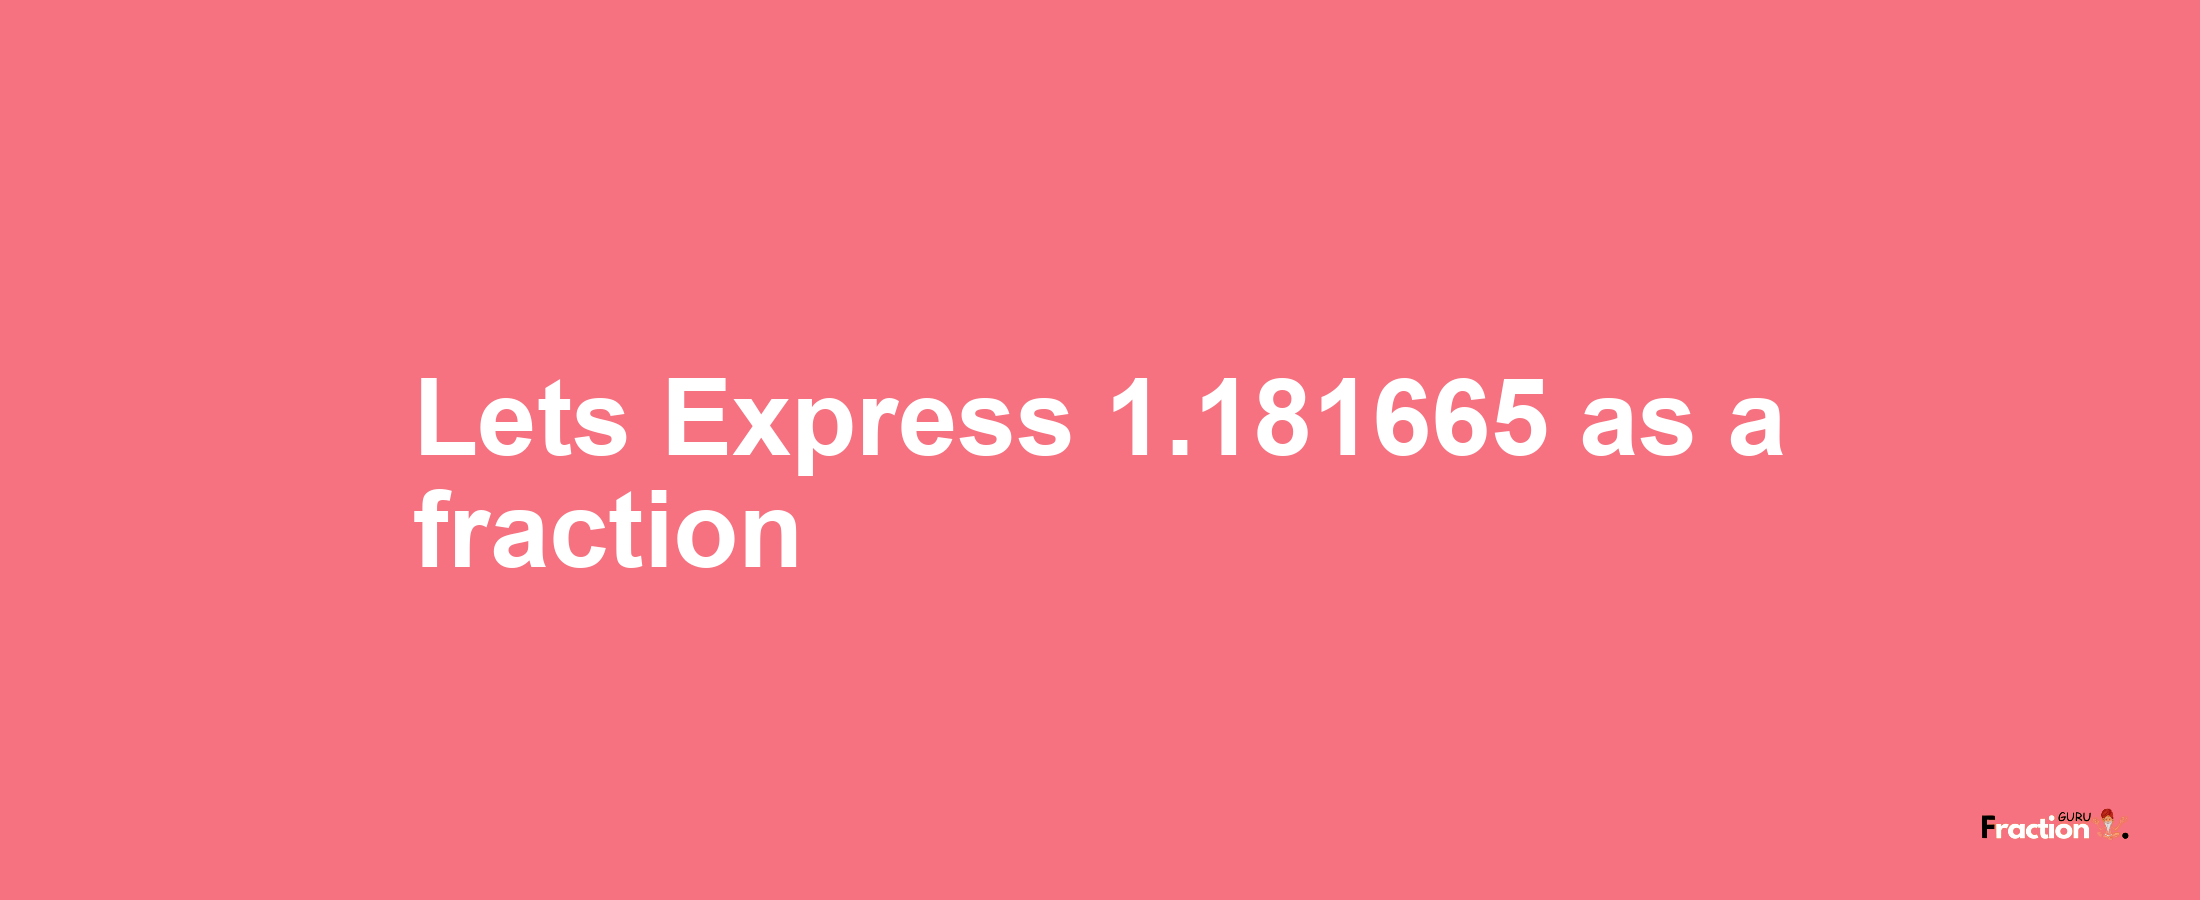 Lets Express 1.181665 as afraction